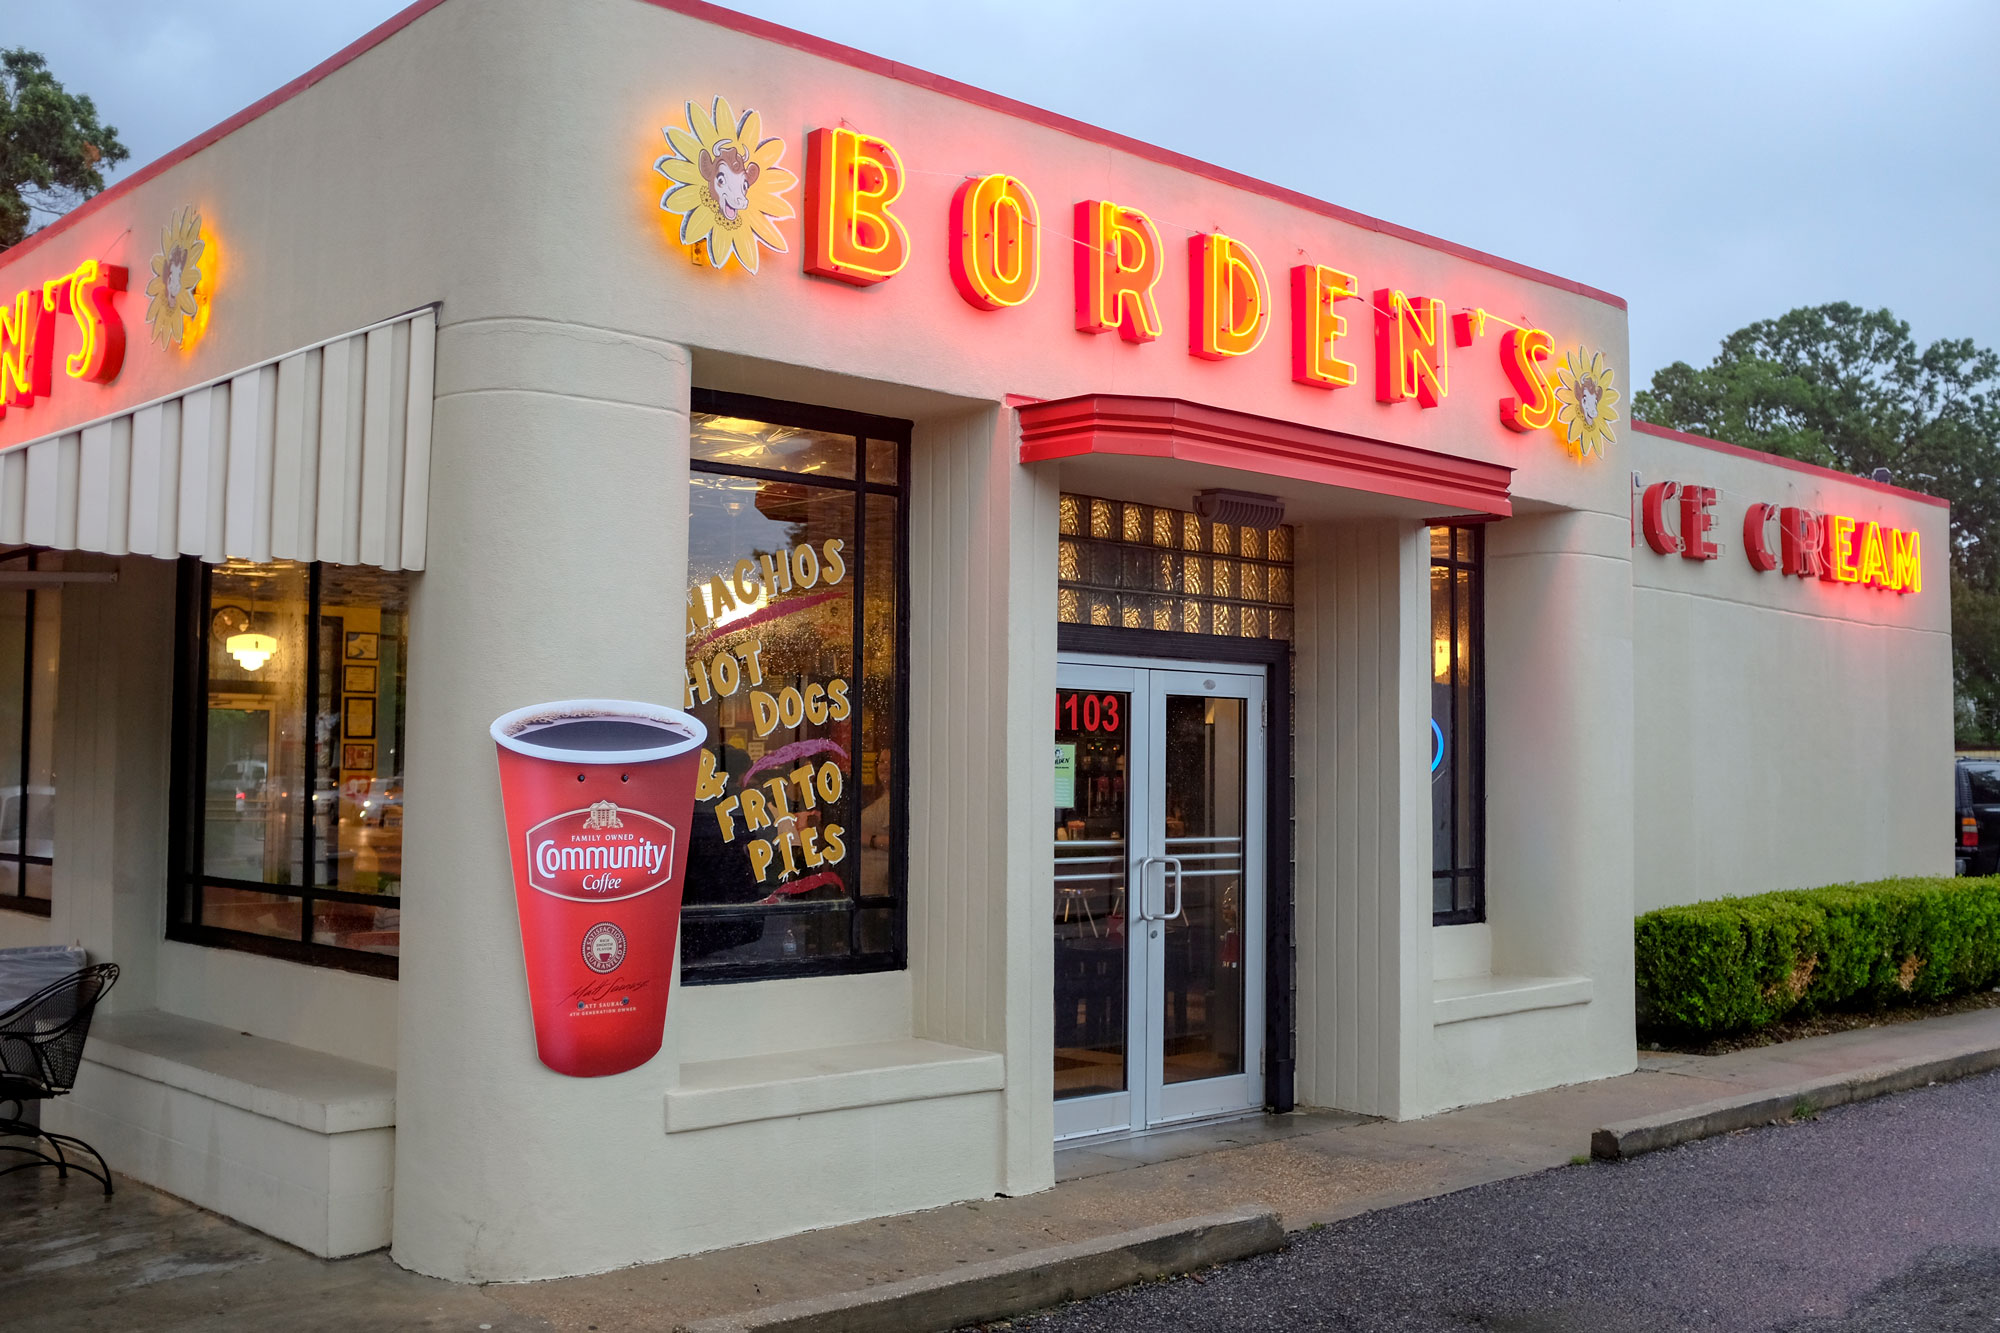 Exterior of Borden's Ice Cream. It's a very retro-looking building with "Borden's" in neon lights and the company's logo (a cow's face in the center of a flower)